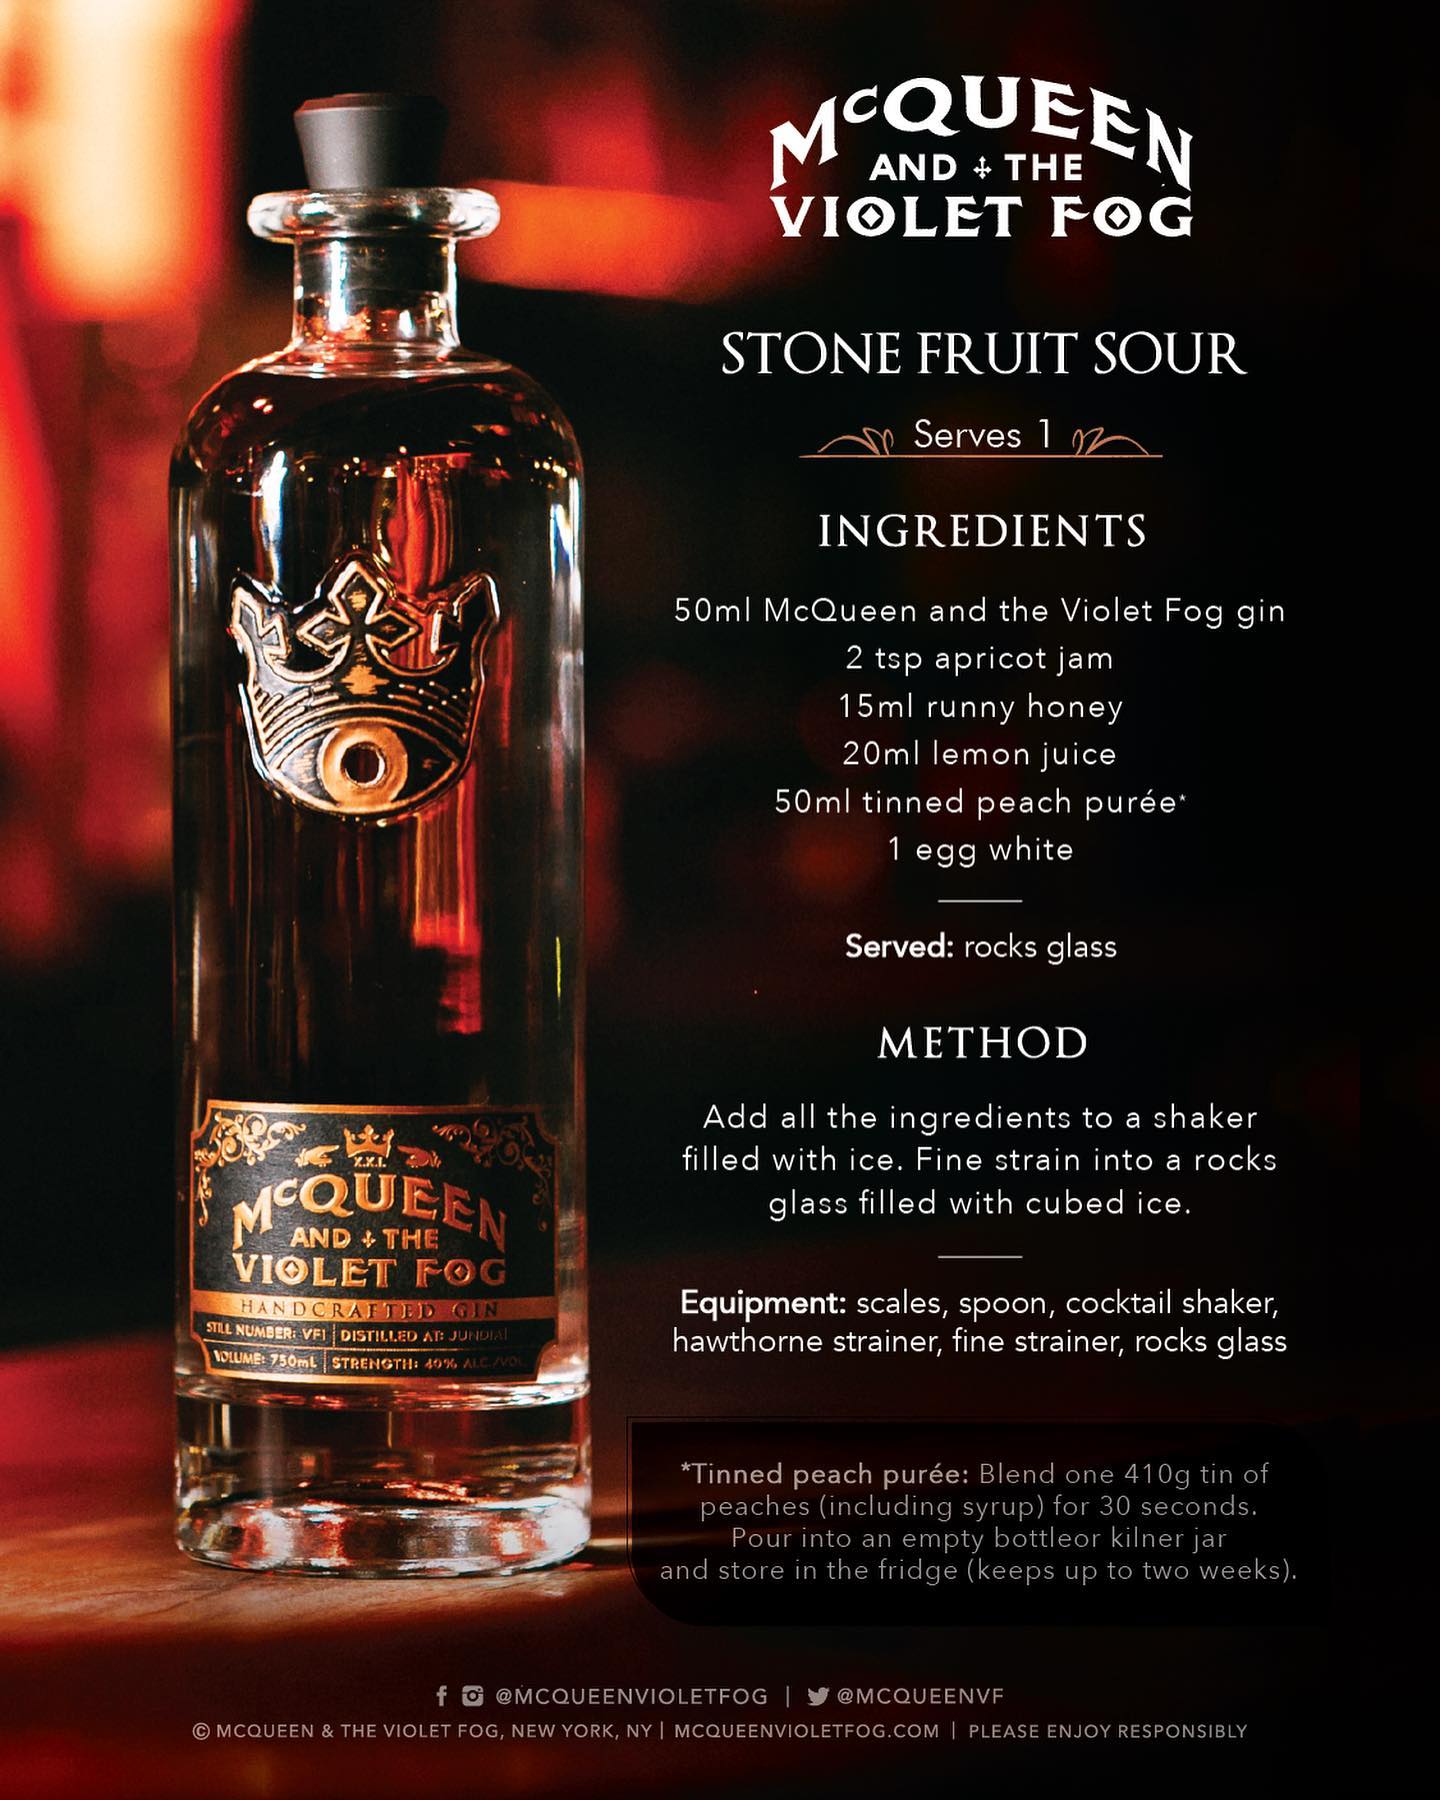 Gin Fog and the McQueen Violet